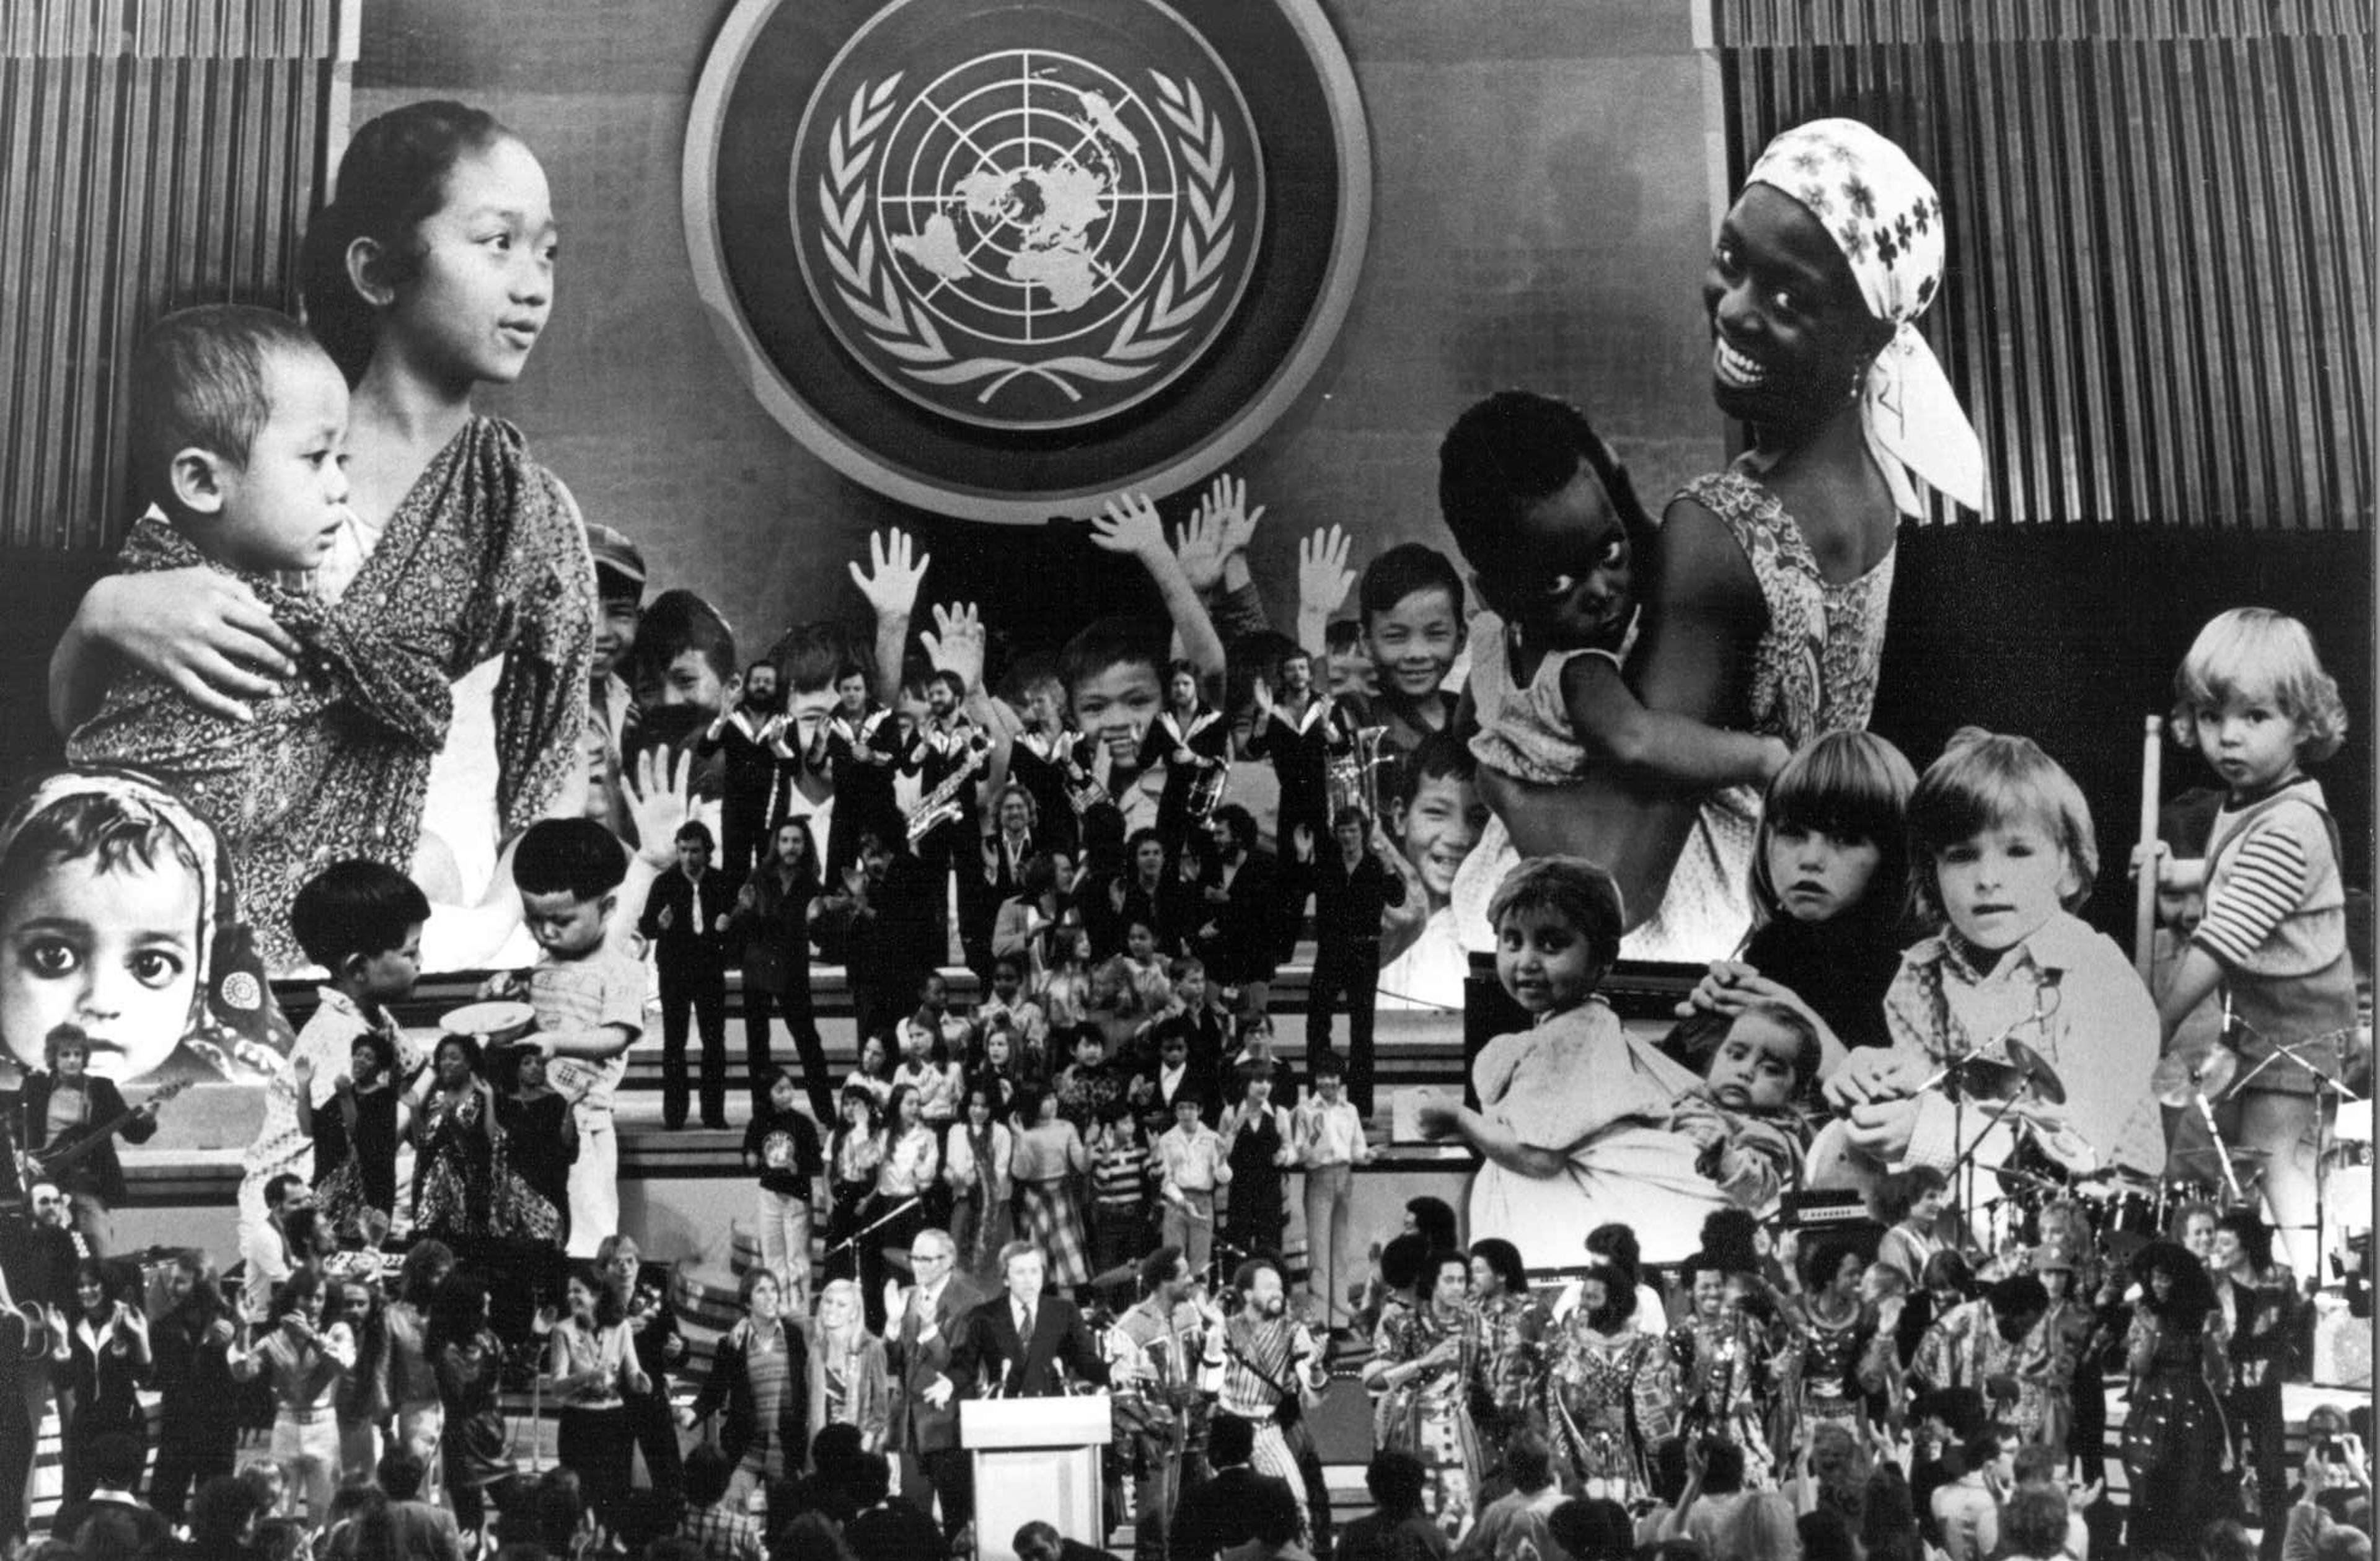 The International Year of the Child - 1979 - was marked by celebrations around the world. It providrd a chance for people and organizations everywhere to reaffirm their concerns for children and accelerate action for improving their situation.